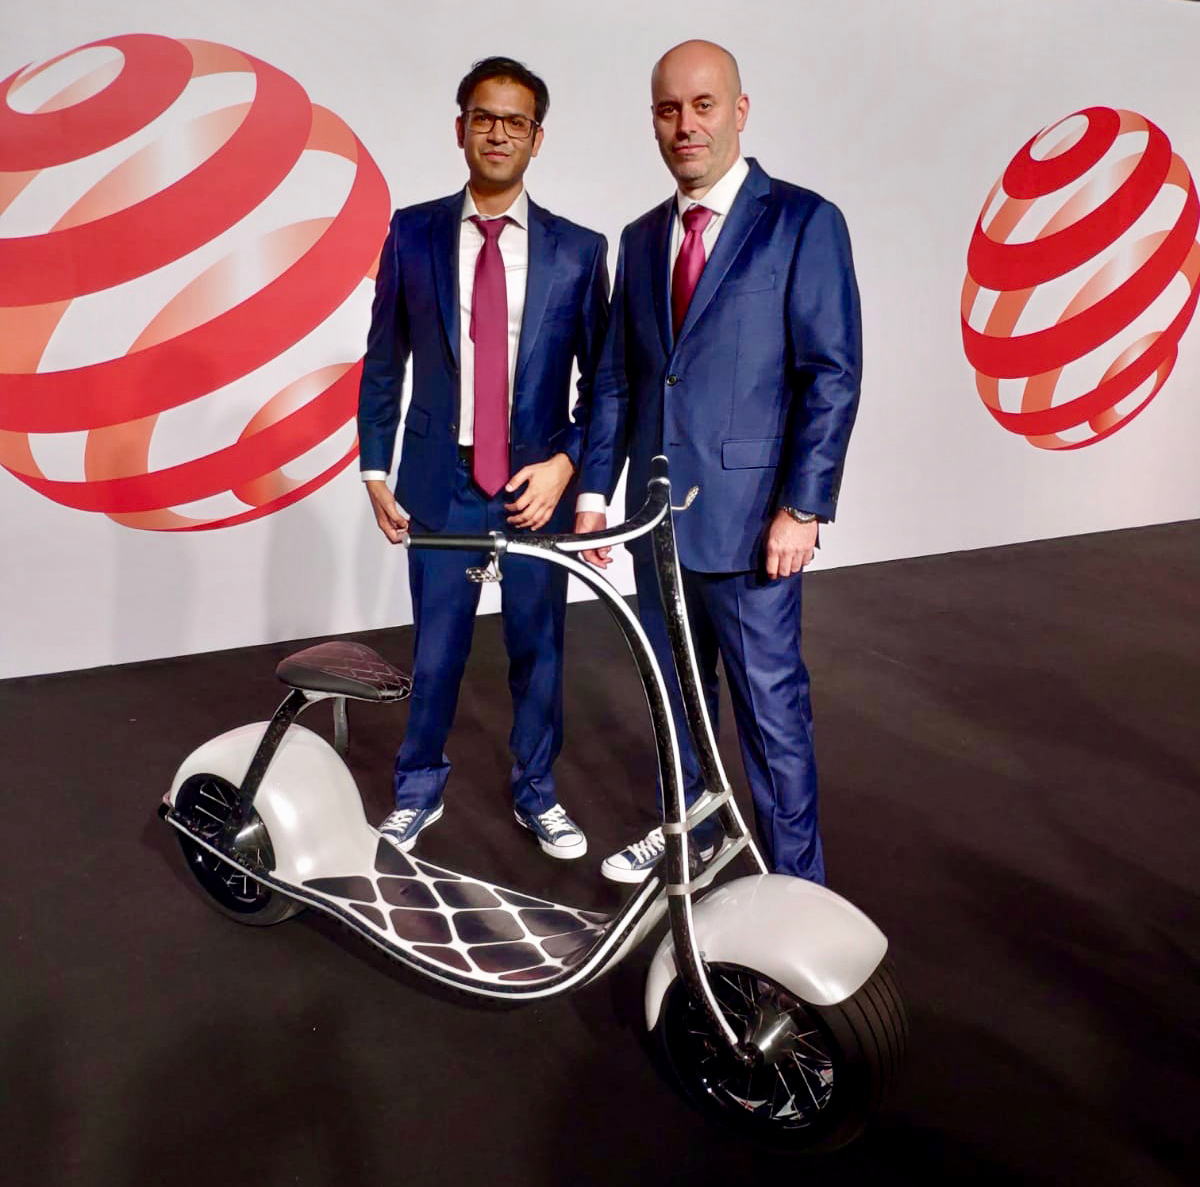 Urban mobilty company Scooterson, aims for 740,000 euros on SeedBlink